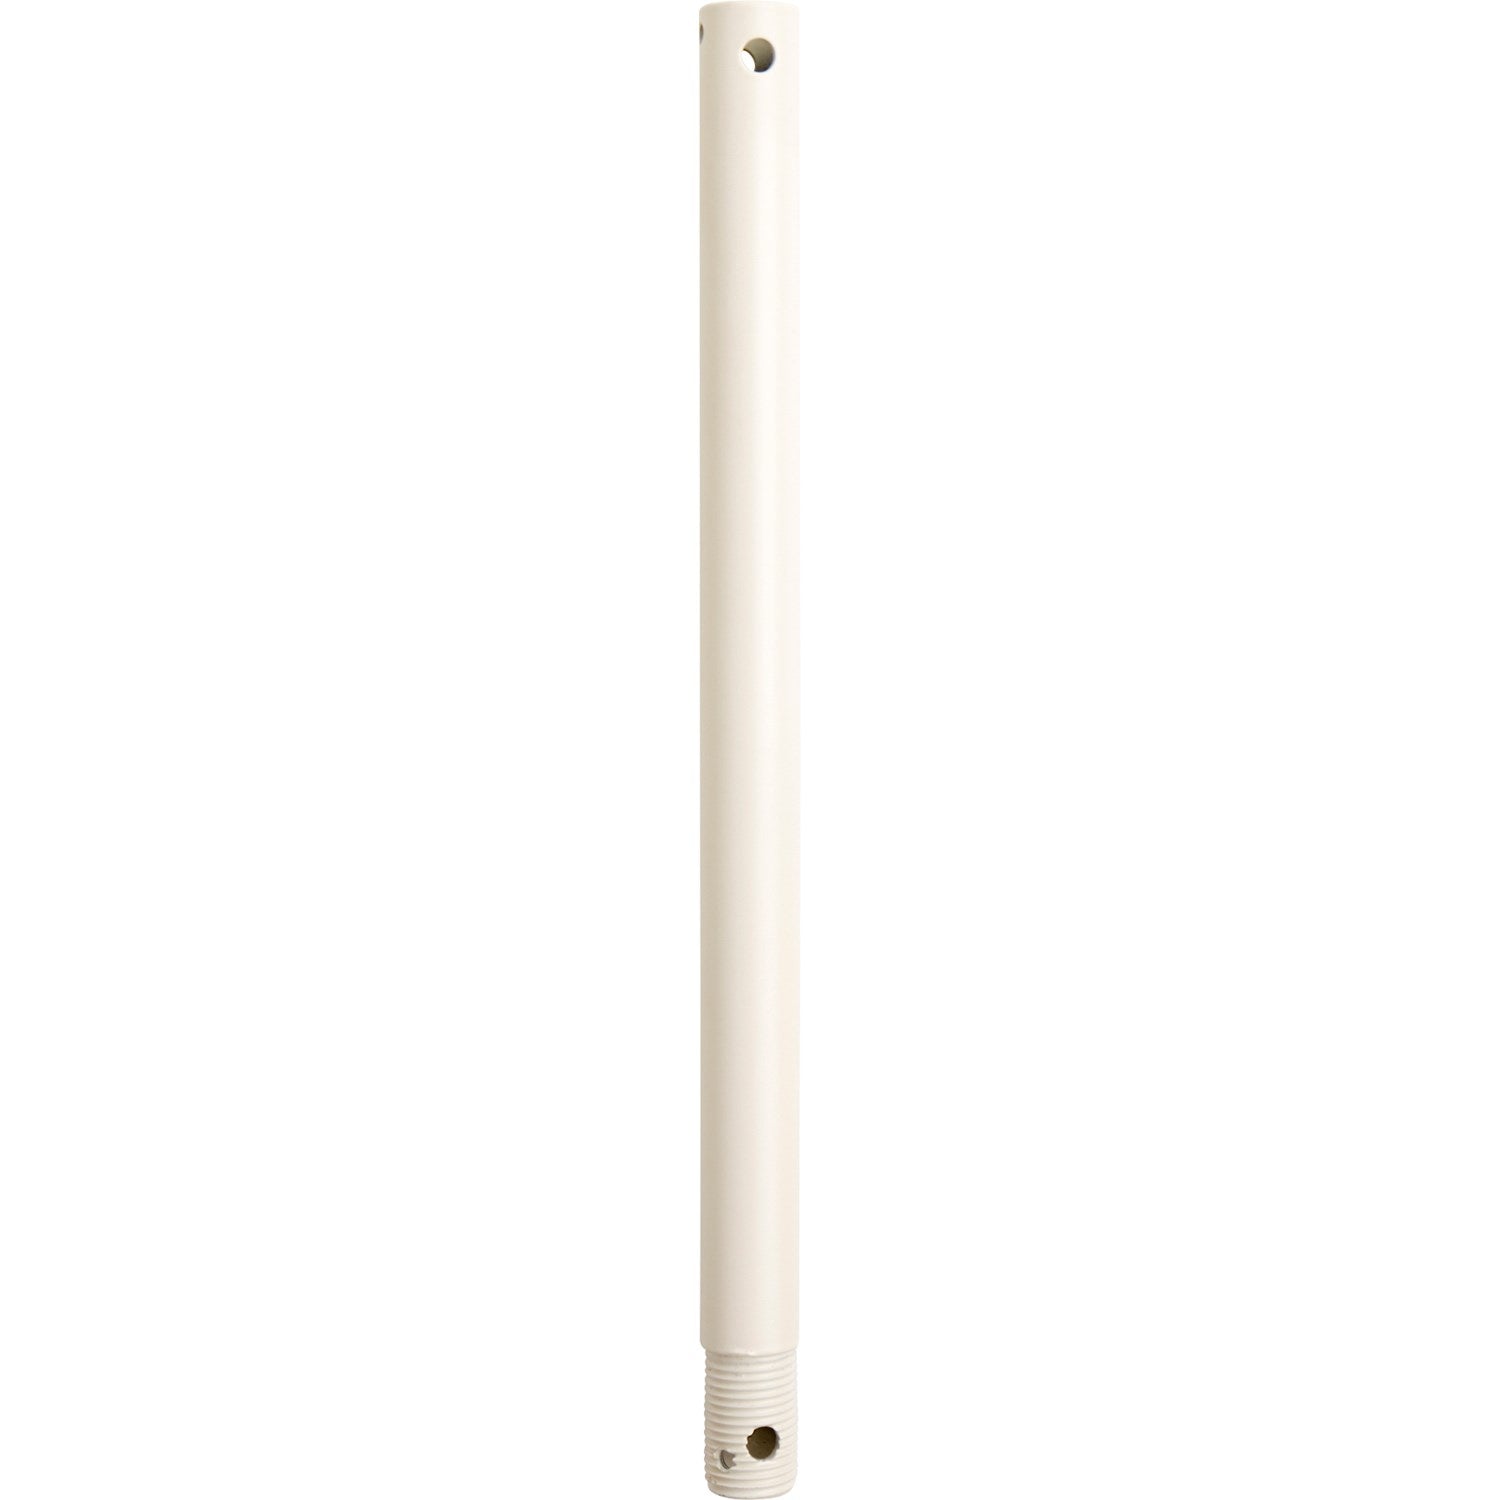 Quorum - 6-1267 - Downrod - 12 in. Downrods - Antique White